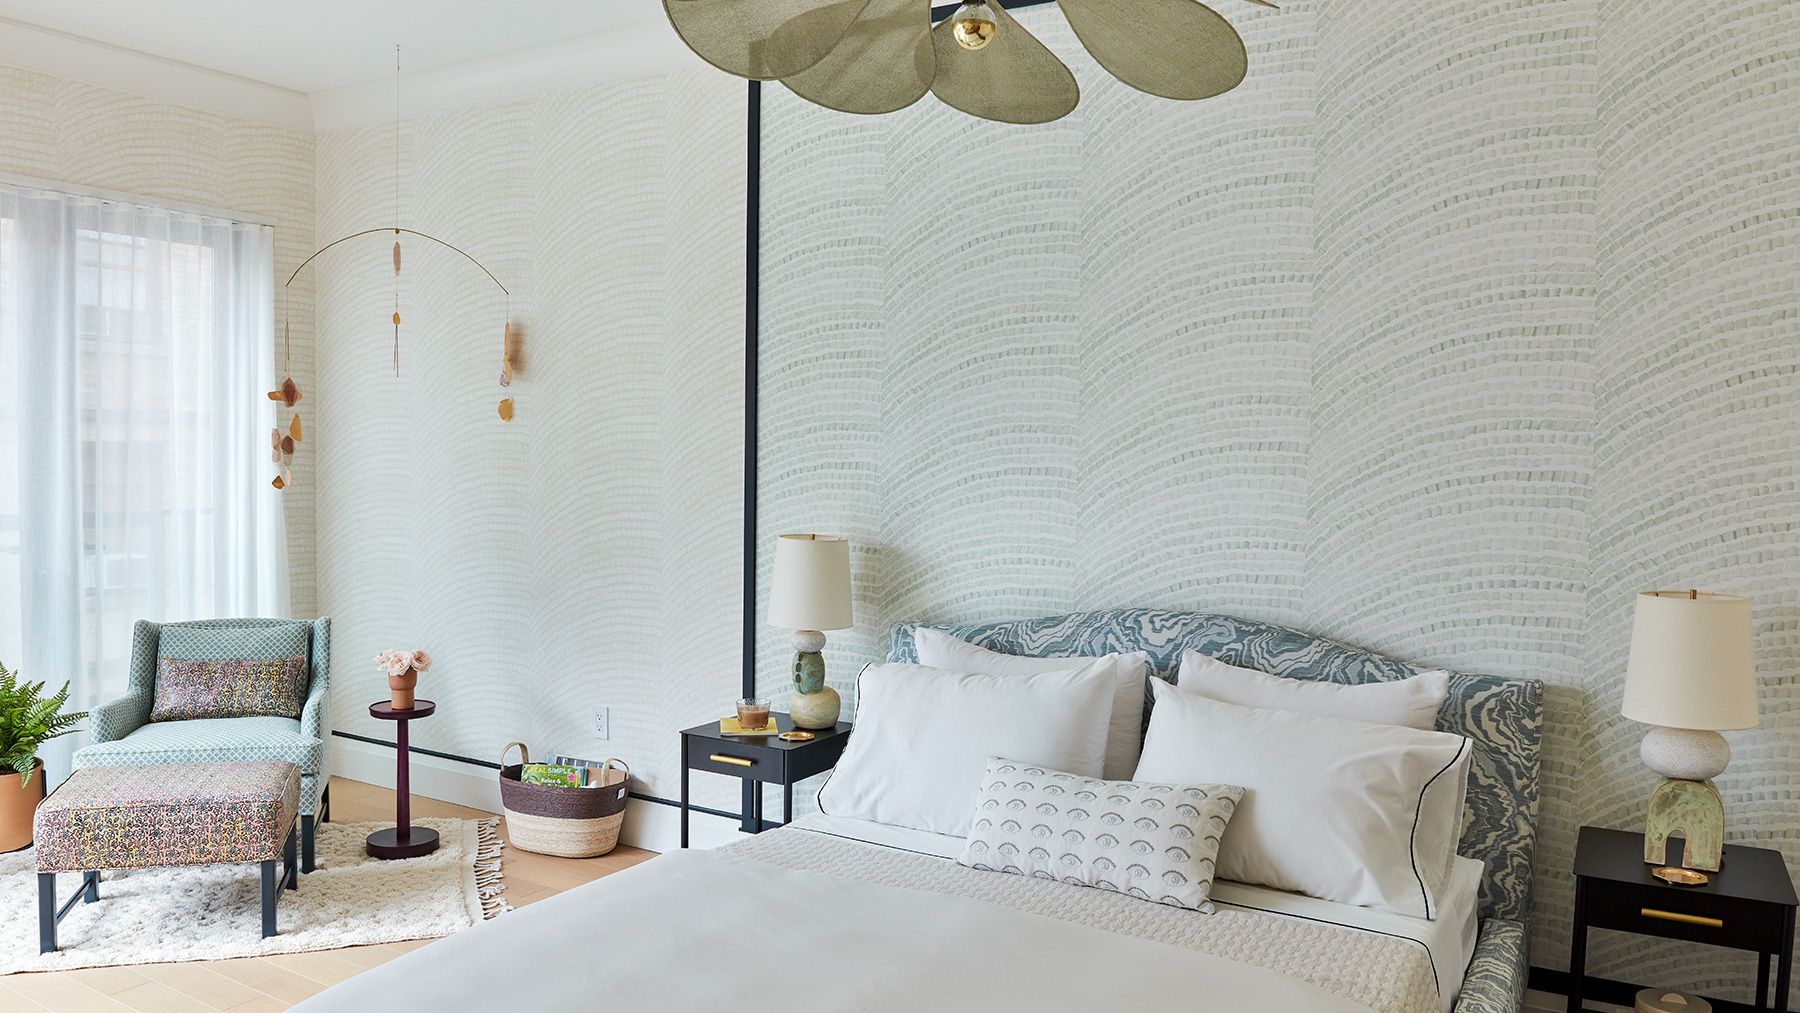 2020 Real Simple Home Tour: Chambre